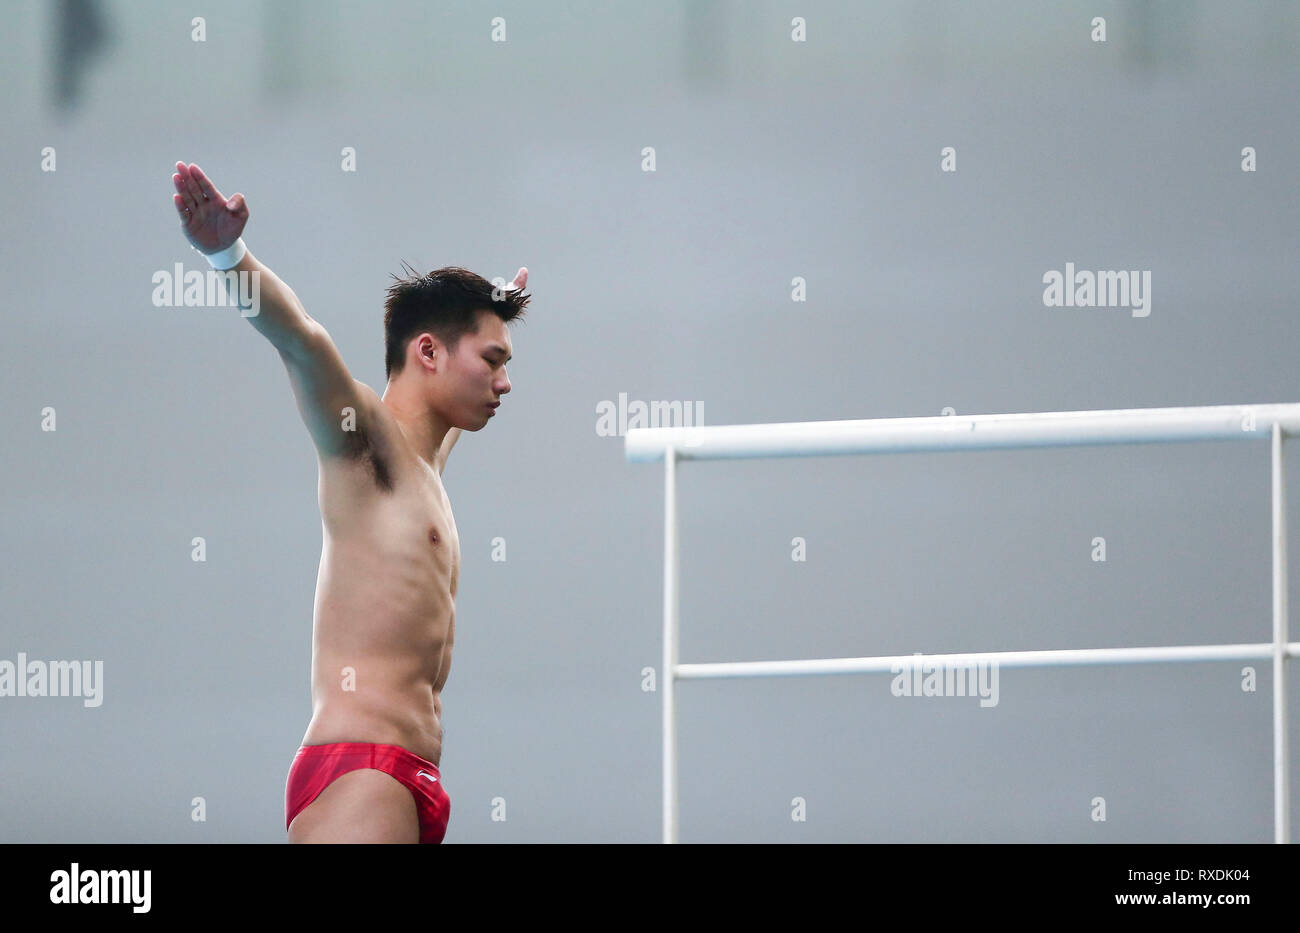 Beijing, China. 9th Mar, 2019. Chen Aisen of China competes during the men's 10m platform final at the FINA Diving World Series 2019 at the National Aquatics Center in Beijing, capital of China, March 9, 2019. Credit: Luo Yuan/Xinhua/Alamy Live News Stock Photo